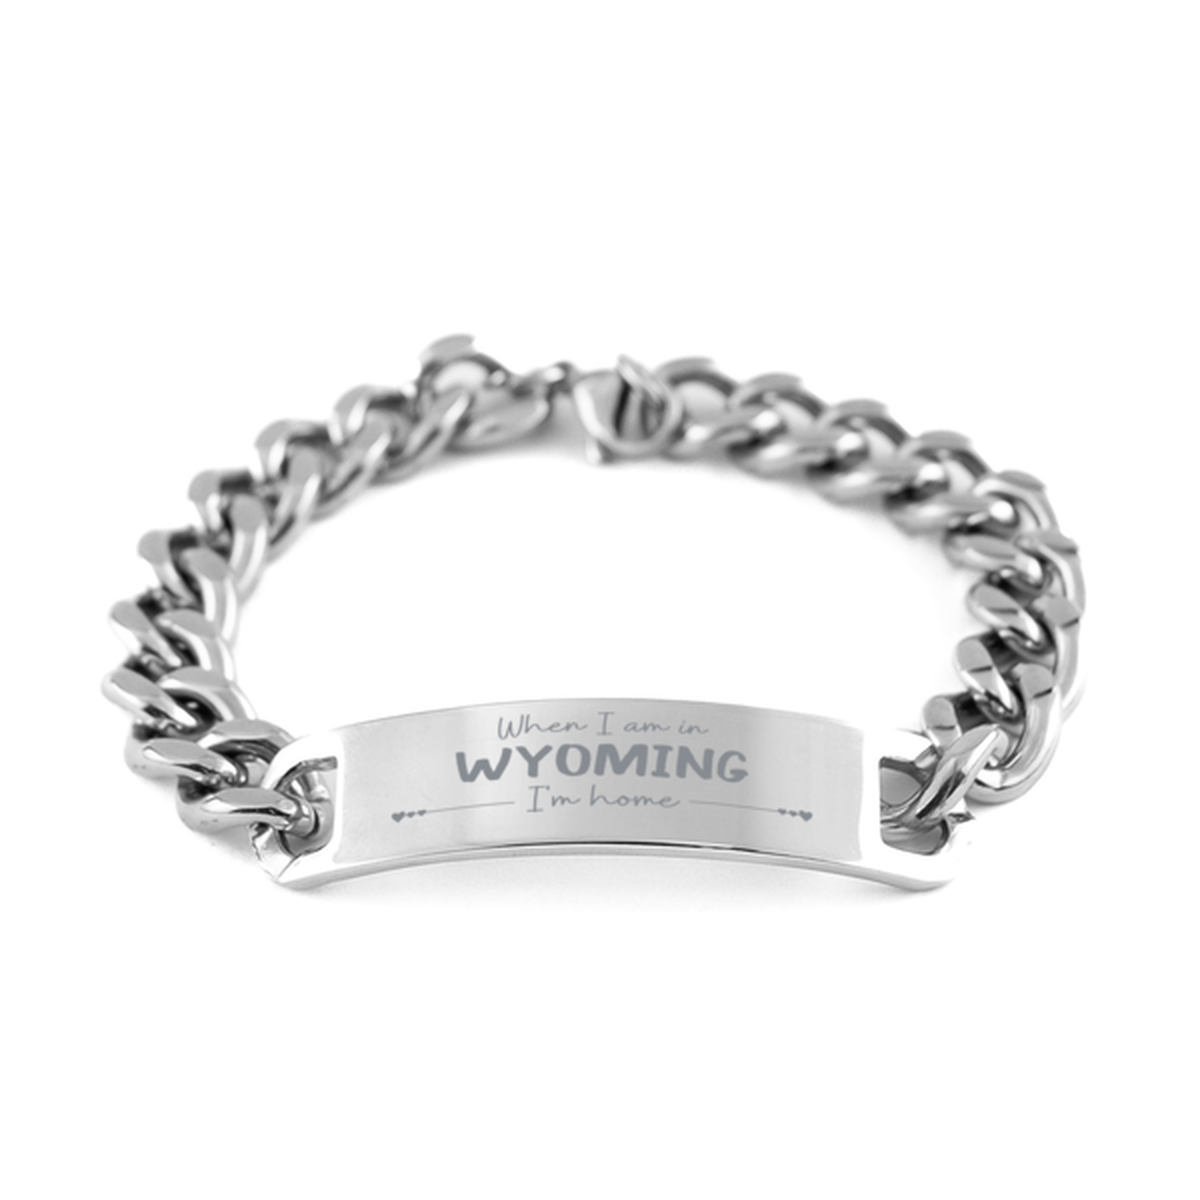 When I am in Wyoming I'm home Cuban Chain Stainless Steel Bracelet, Cheap Gifts For Wyoming, State Wyoming Birthday Gifts for Friends Coworker